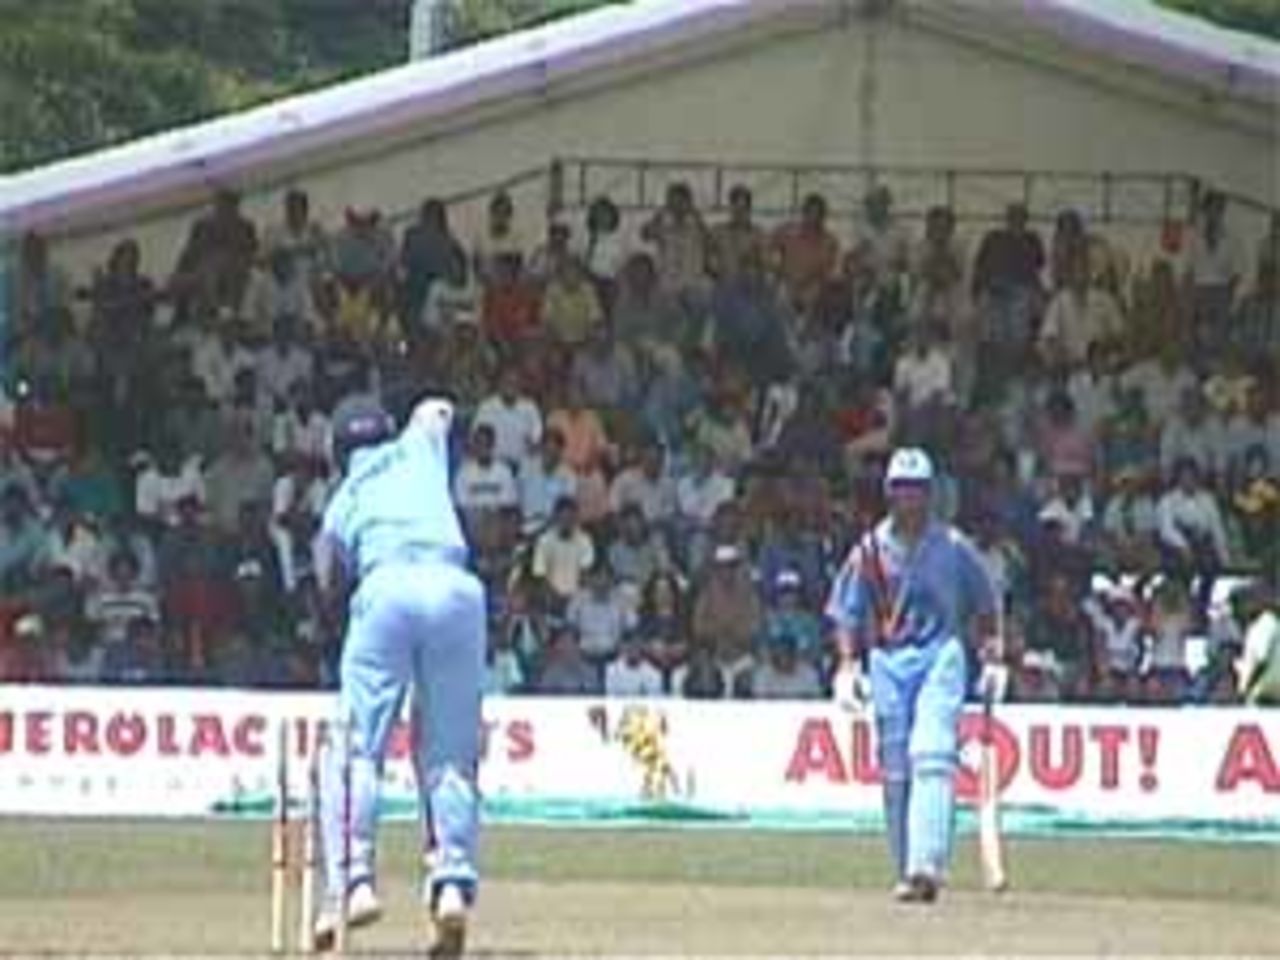 Rahul Dravid looks on as Ganguly defends solidly, India v West Indies (Final), Coca-Cola Singapore Challenge, 1999-2000, Kallang Ground, Singapore, 7 Sep 1999.